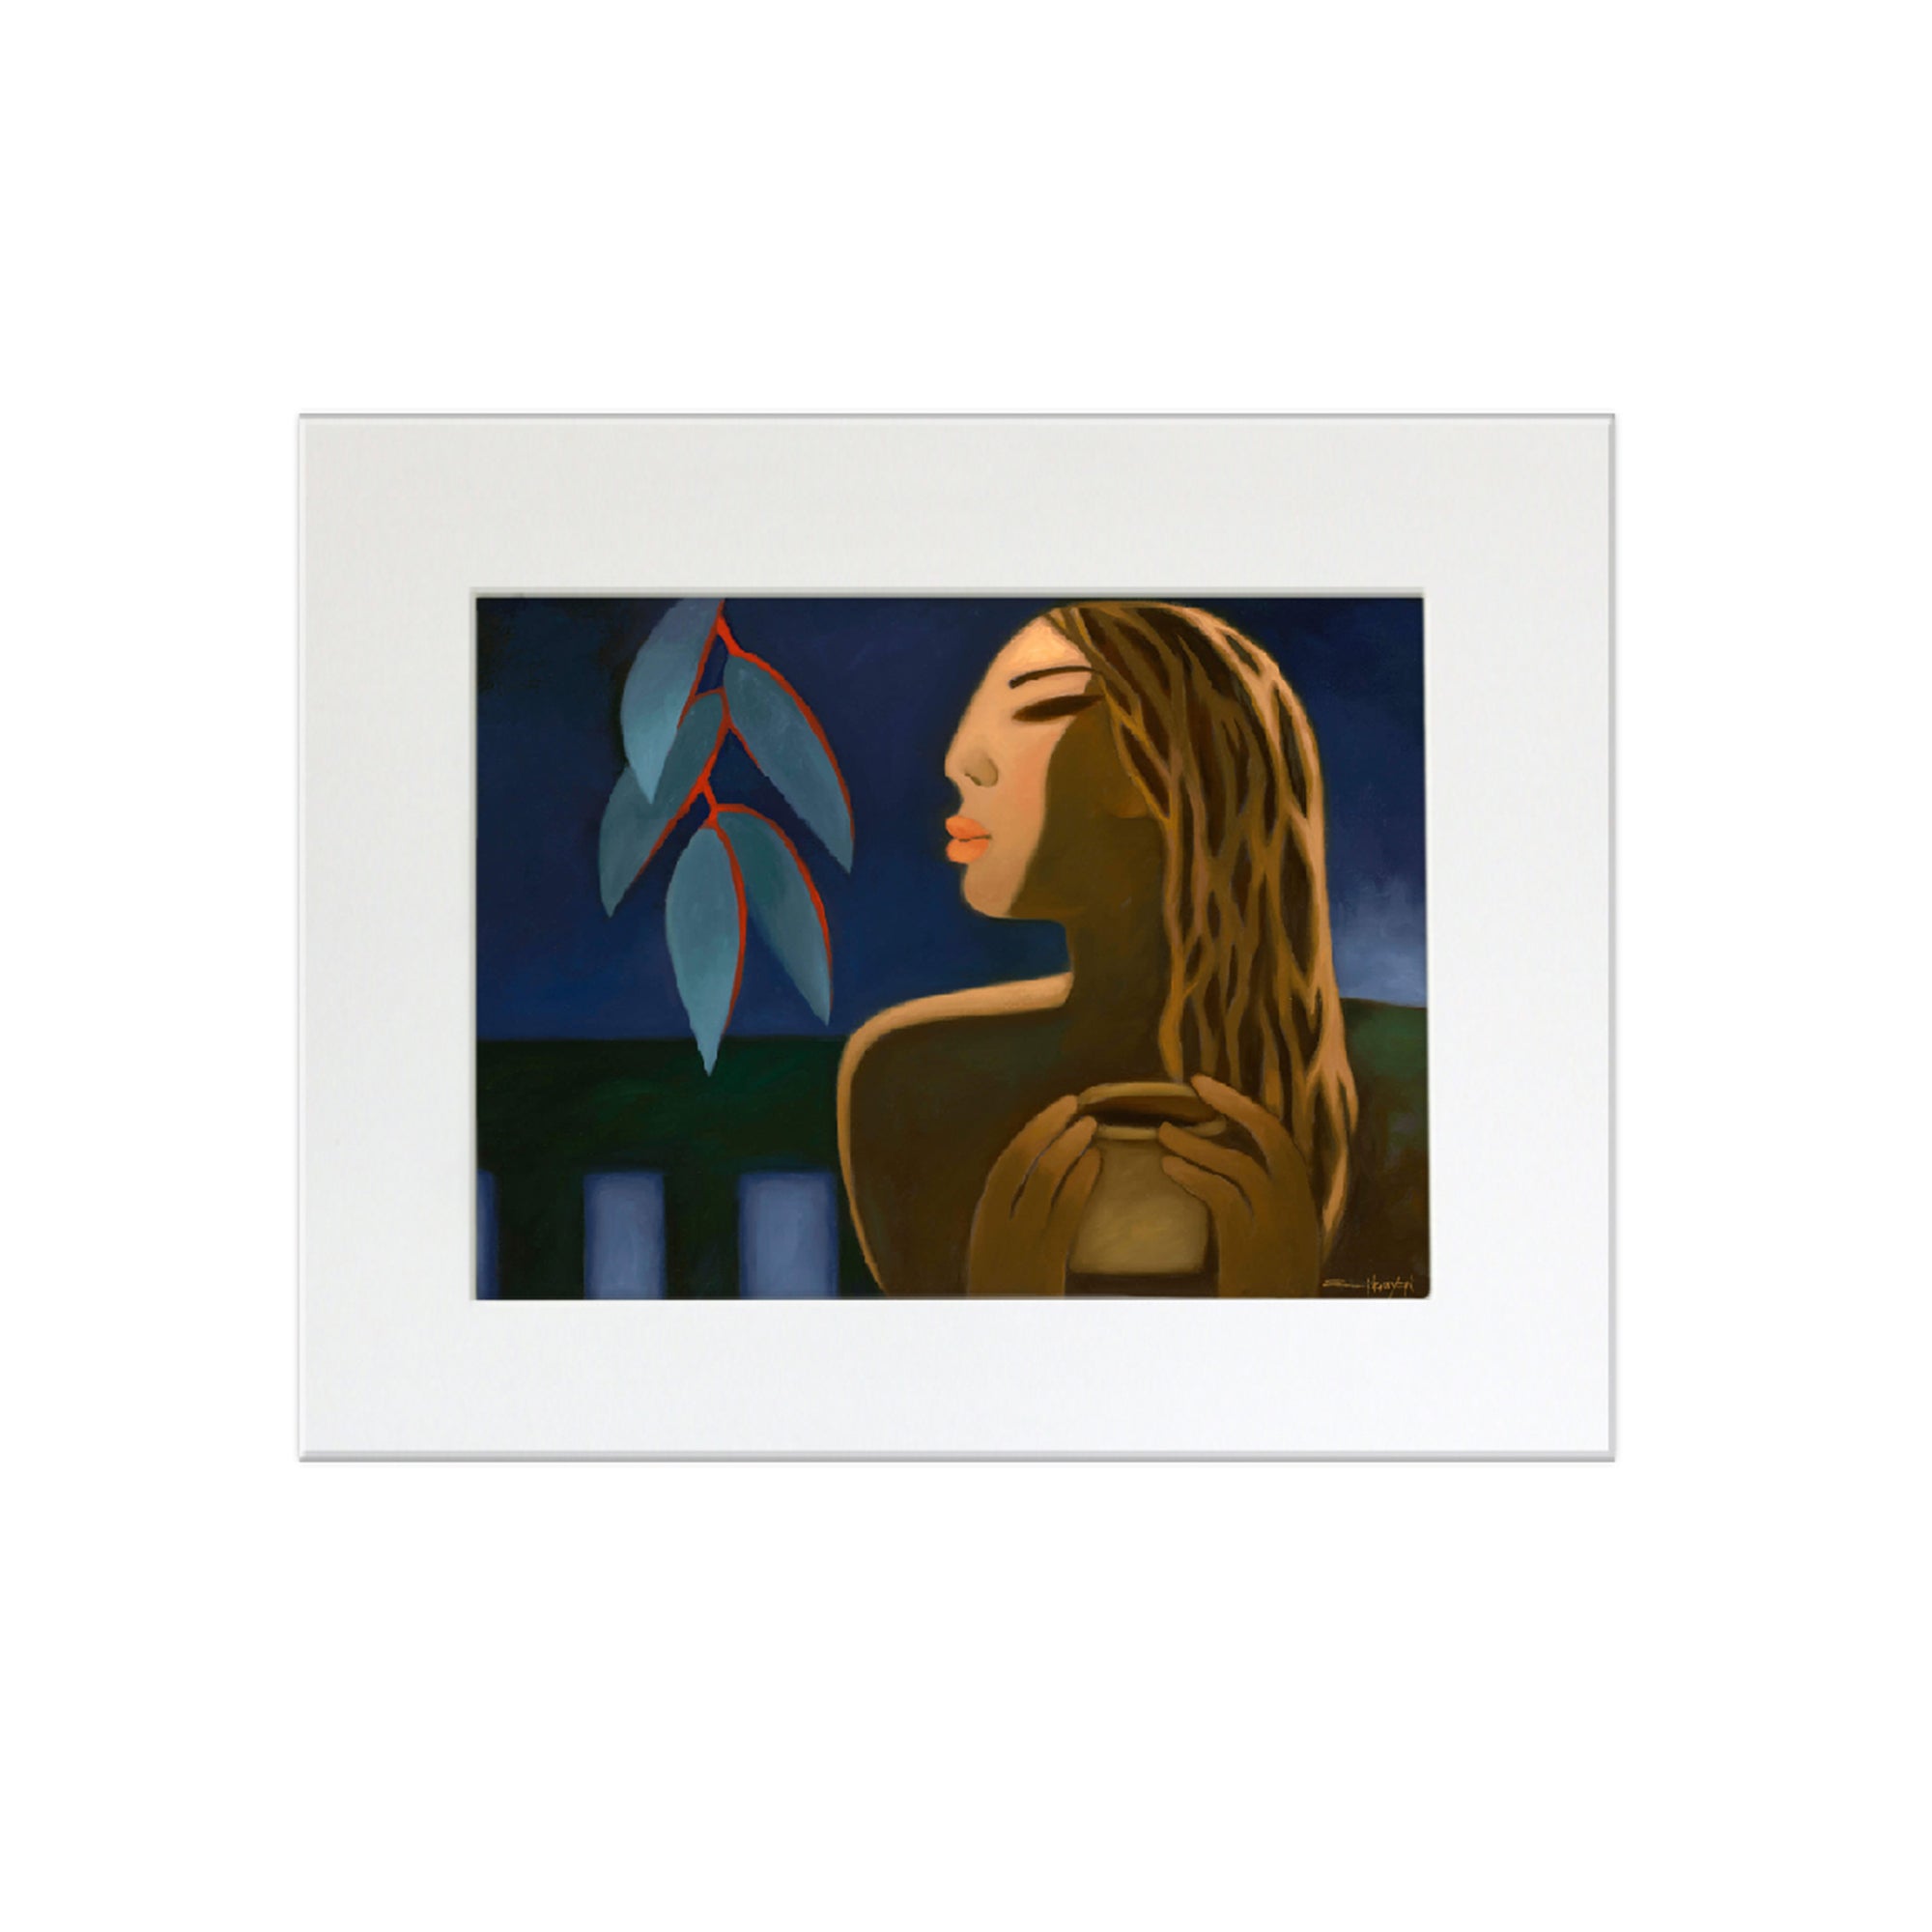 A matted art print of a woman enjoying the twilight view and her cup of coffee by Hawaii artist Tim Nguyen